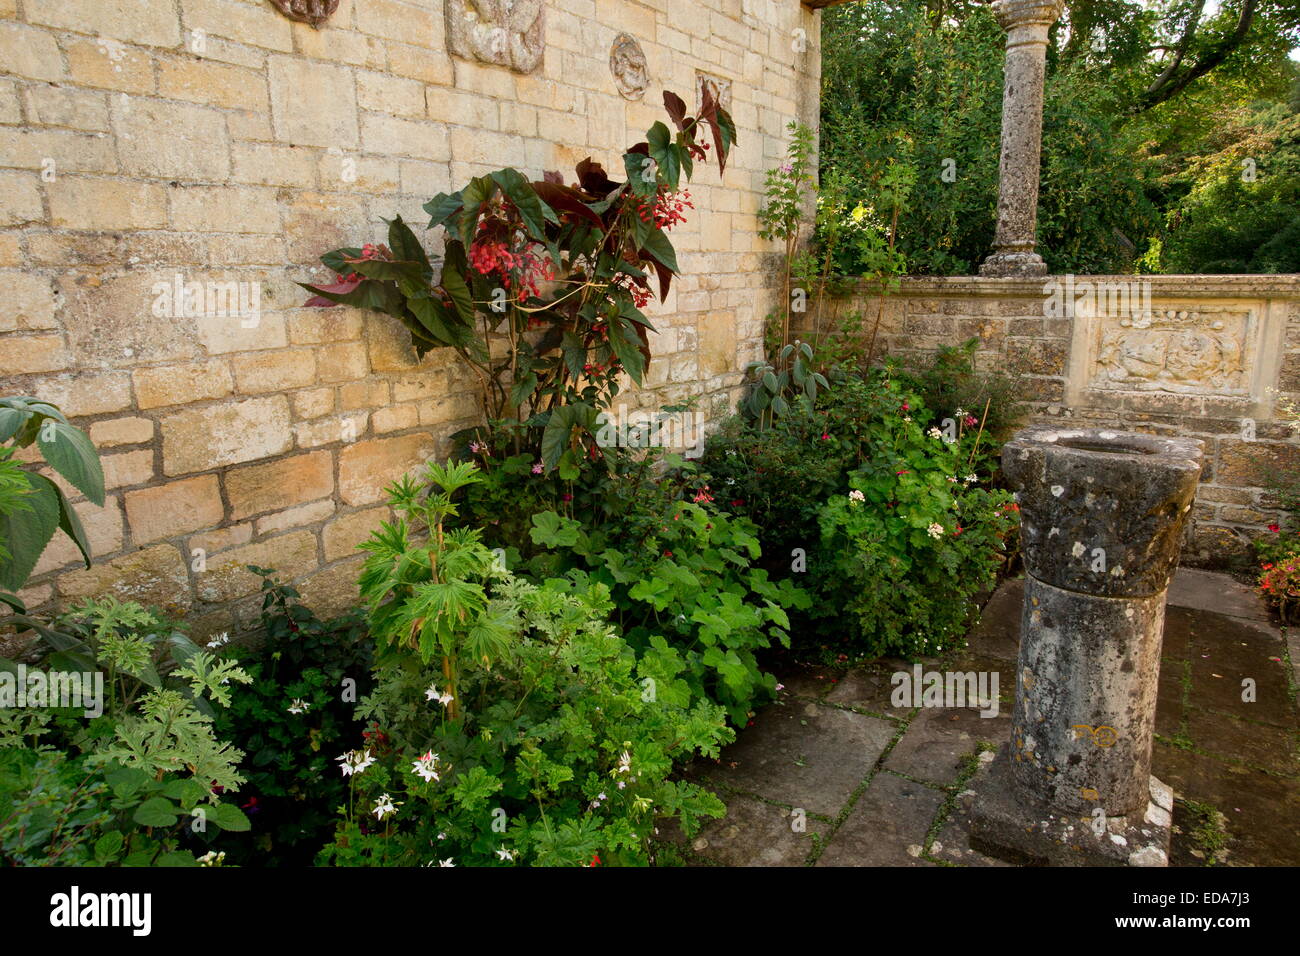 Italianate Garden designed by Harold Peto at Iford Manor, by the River Frome, in Wiltshire. Stock Photo